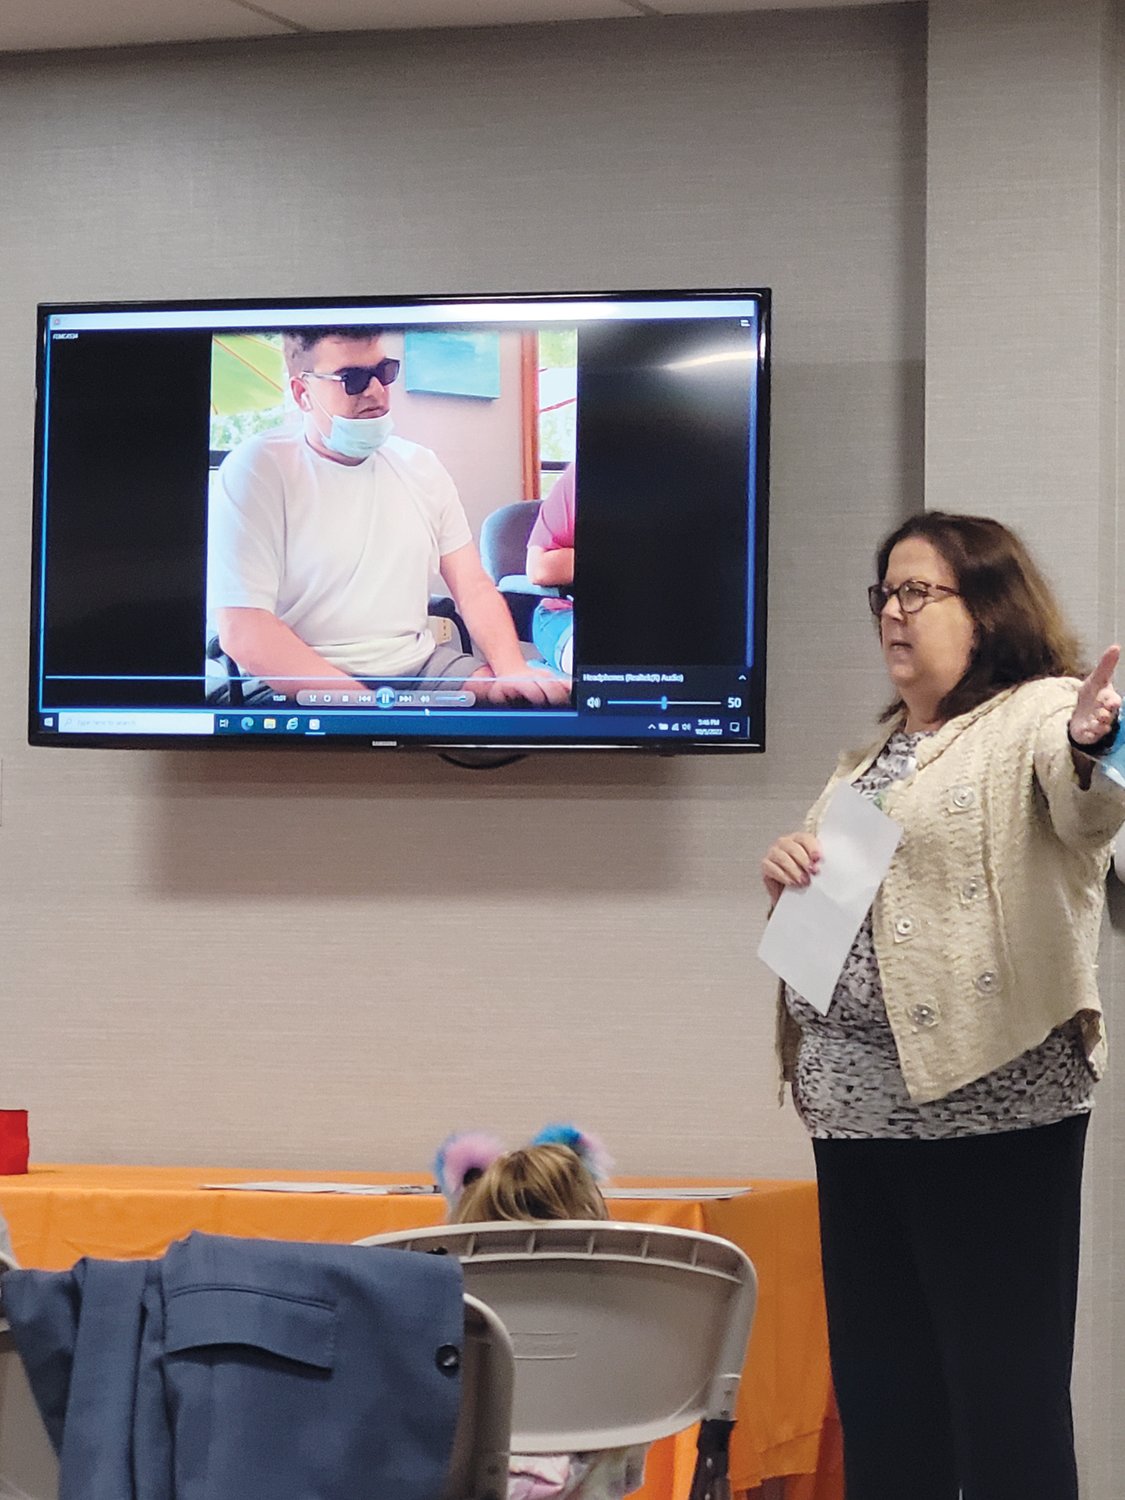 LEADING THE CHARGE: The Autism Project (TAP) Executive Director Joanne G. Quinn spoke to the audience gathered in the organization’s Atwood Avenue headquarters last Wednesday, following a short film depicting the Unity Community’s many successes and programs.